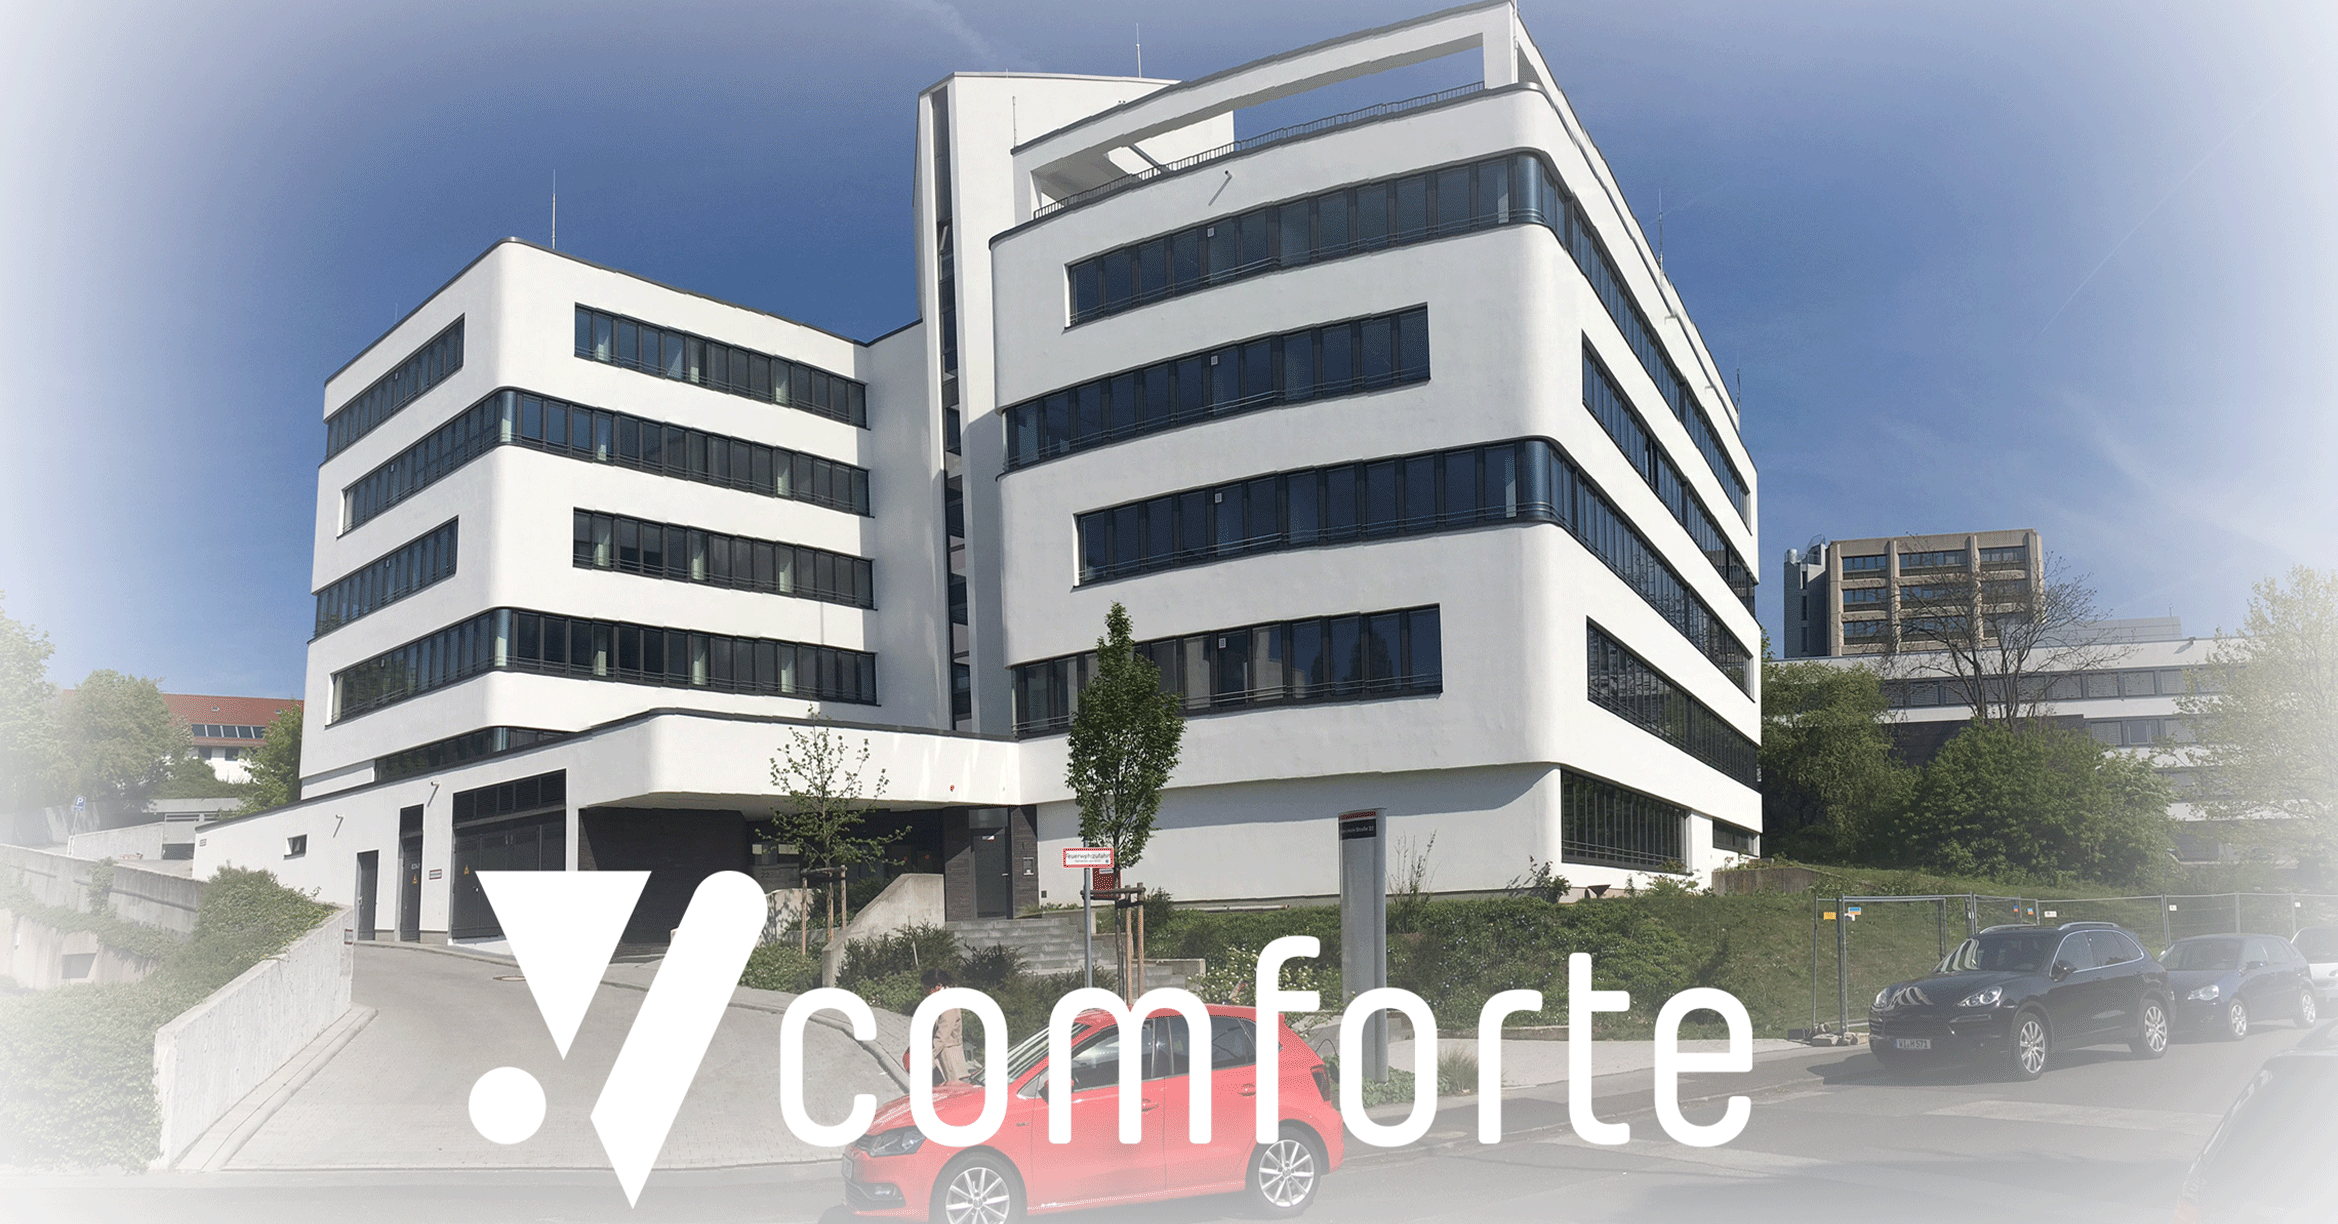 comforte AG Joins the AWS Partner Network, Provides Joint Customers with Data-Centric Security